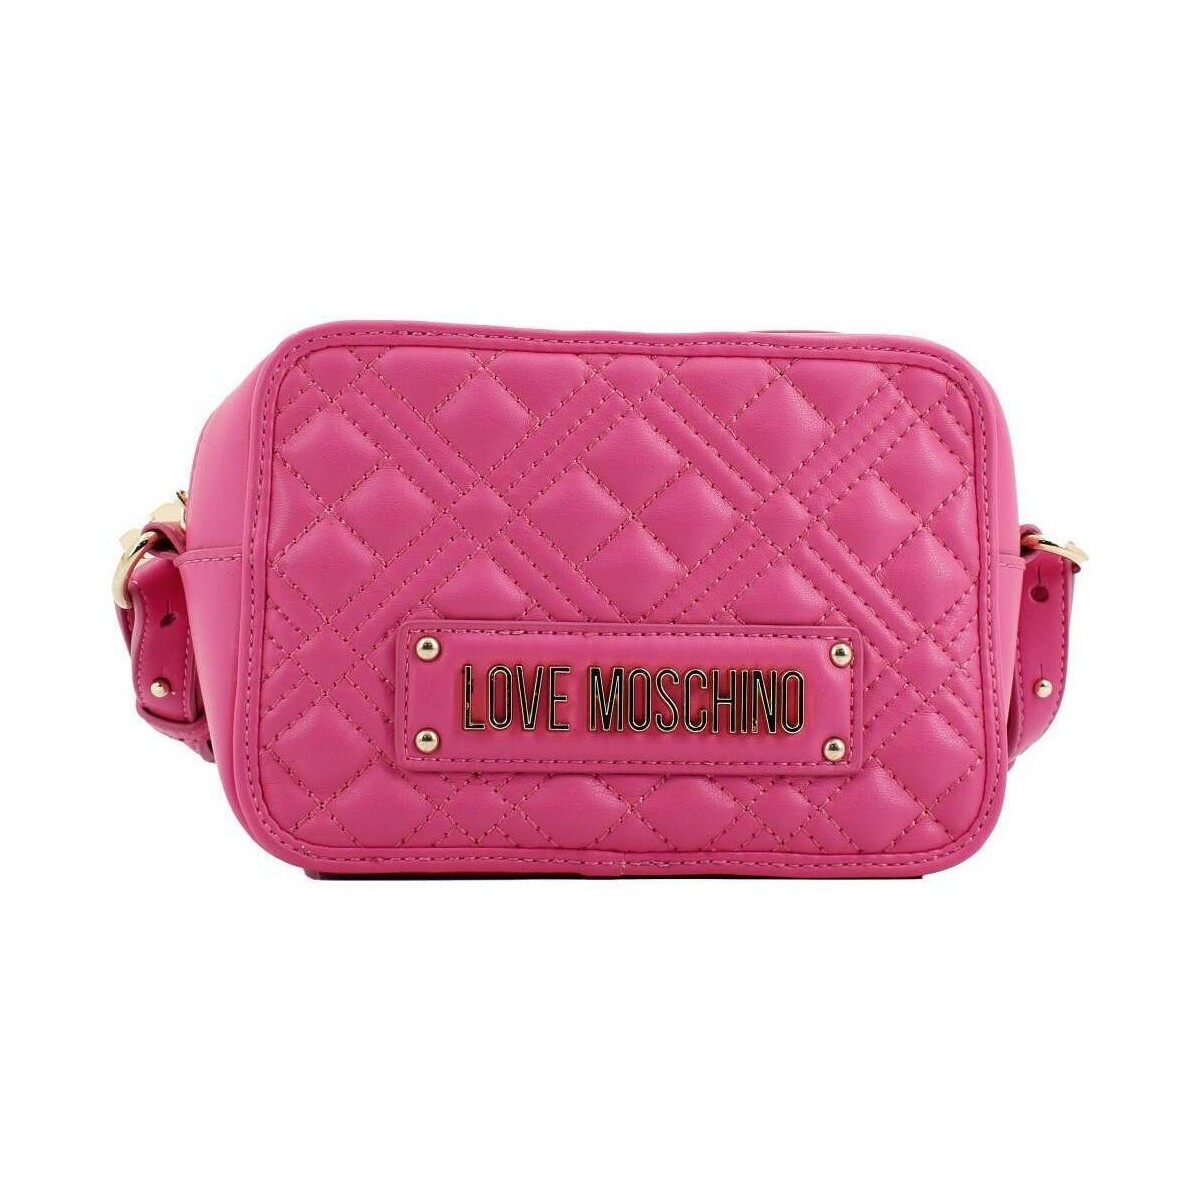 Sacs Femme Sacs Love Moschino BORSA QUILTED Rose